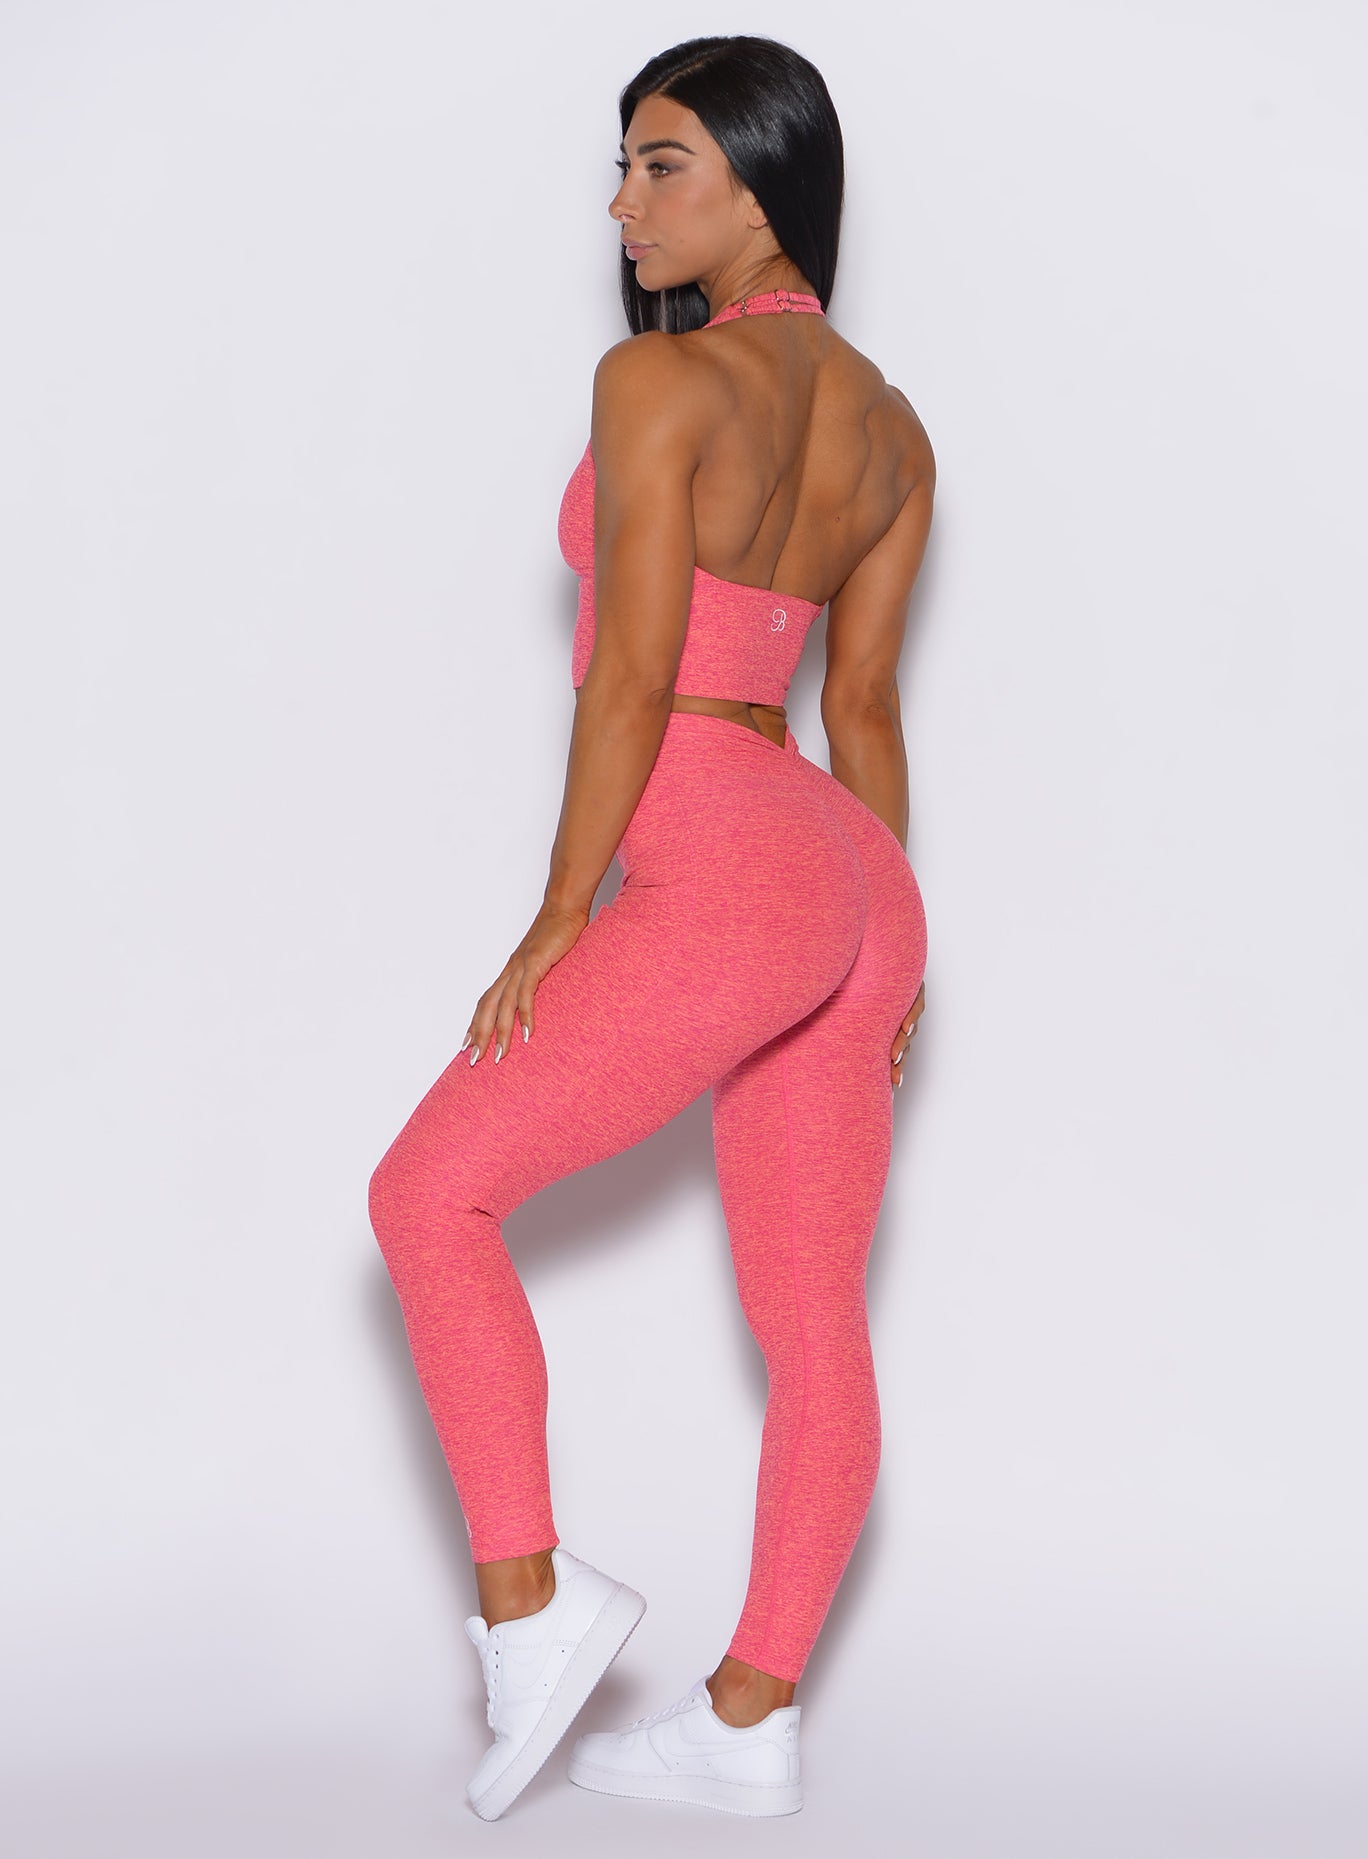 Left side profile view of a model wearing our V back leggings in Neon Tangerine Shock color along with a matching bra   